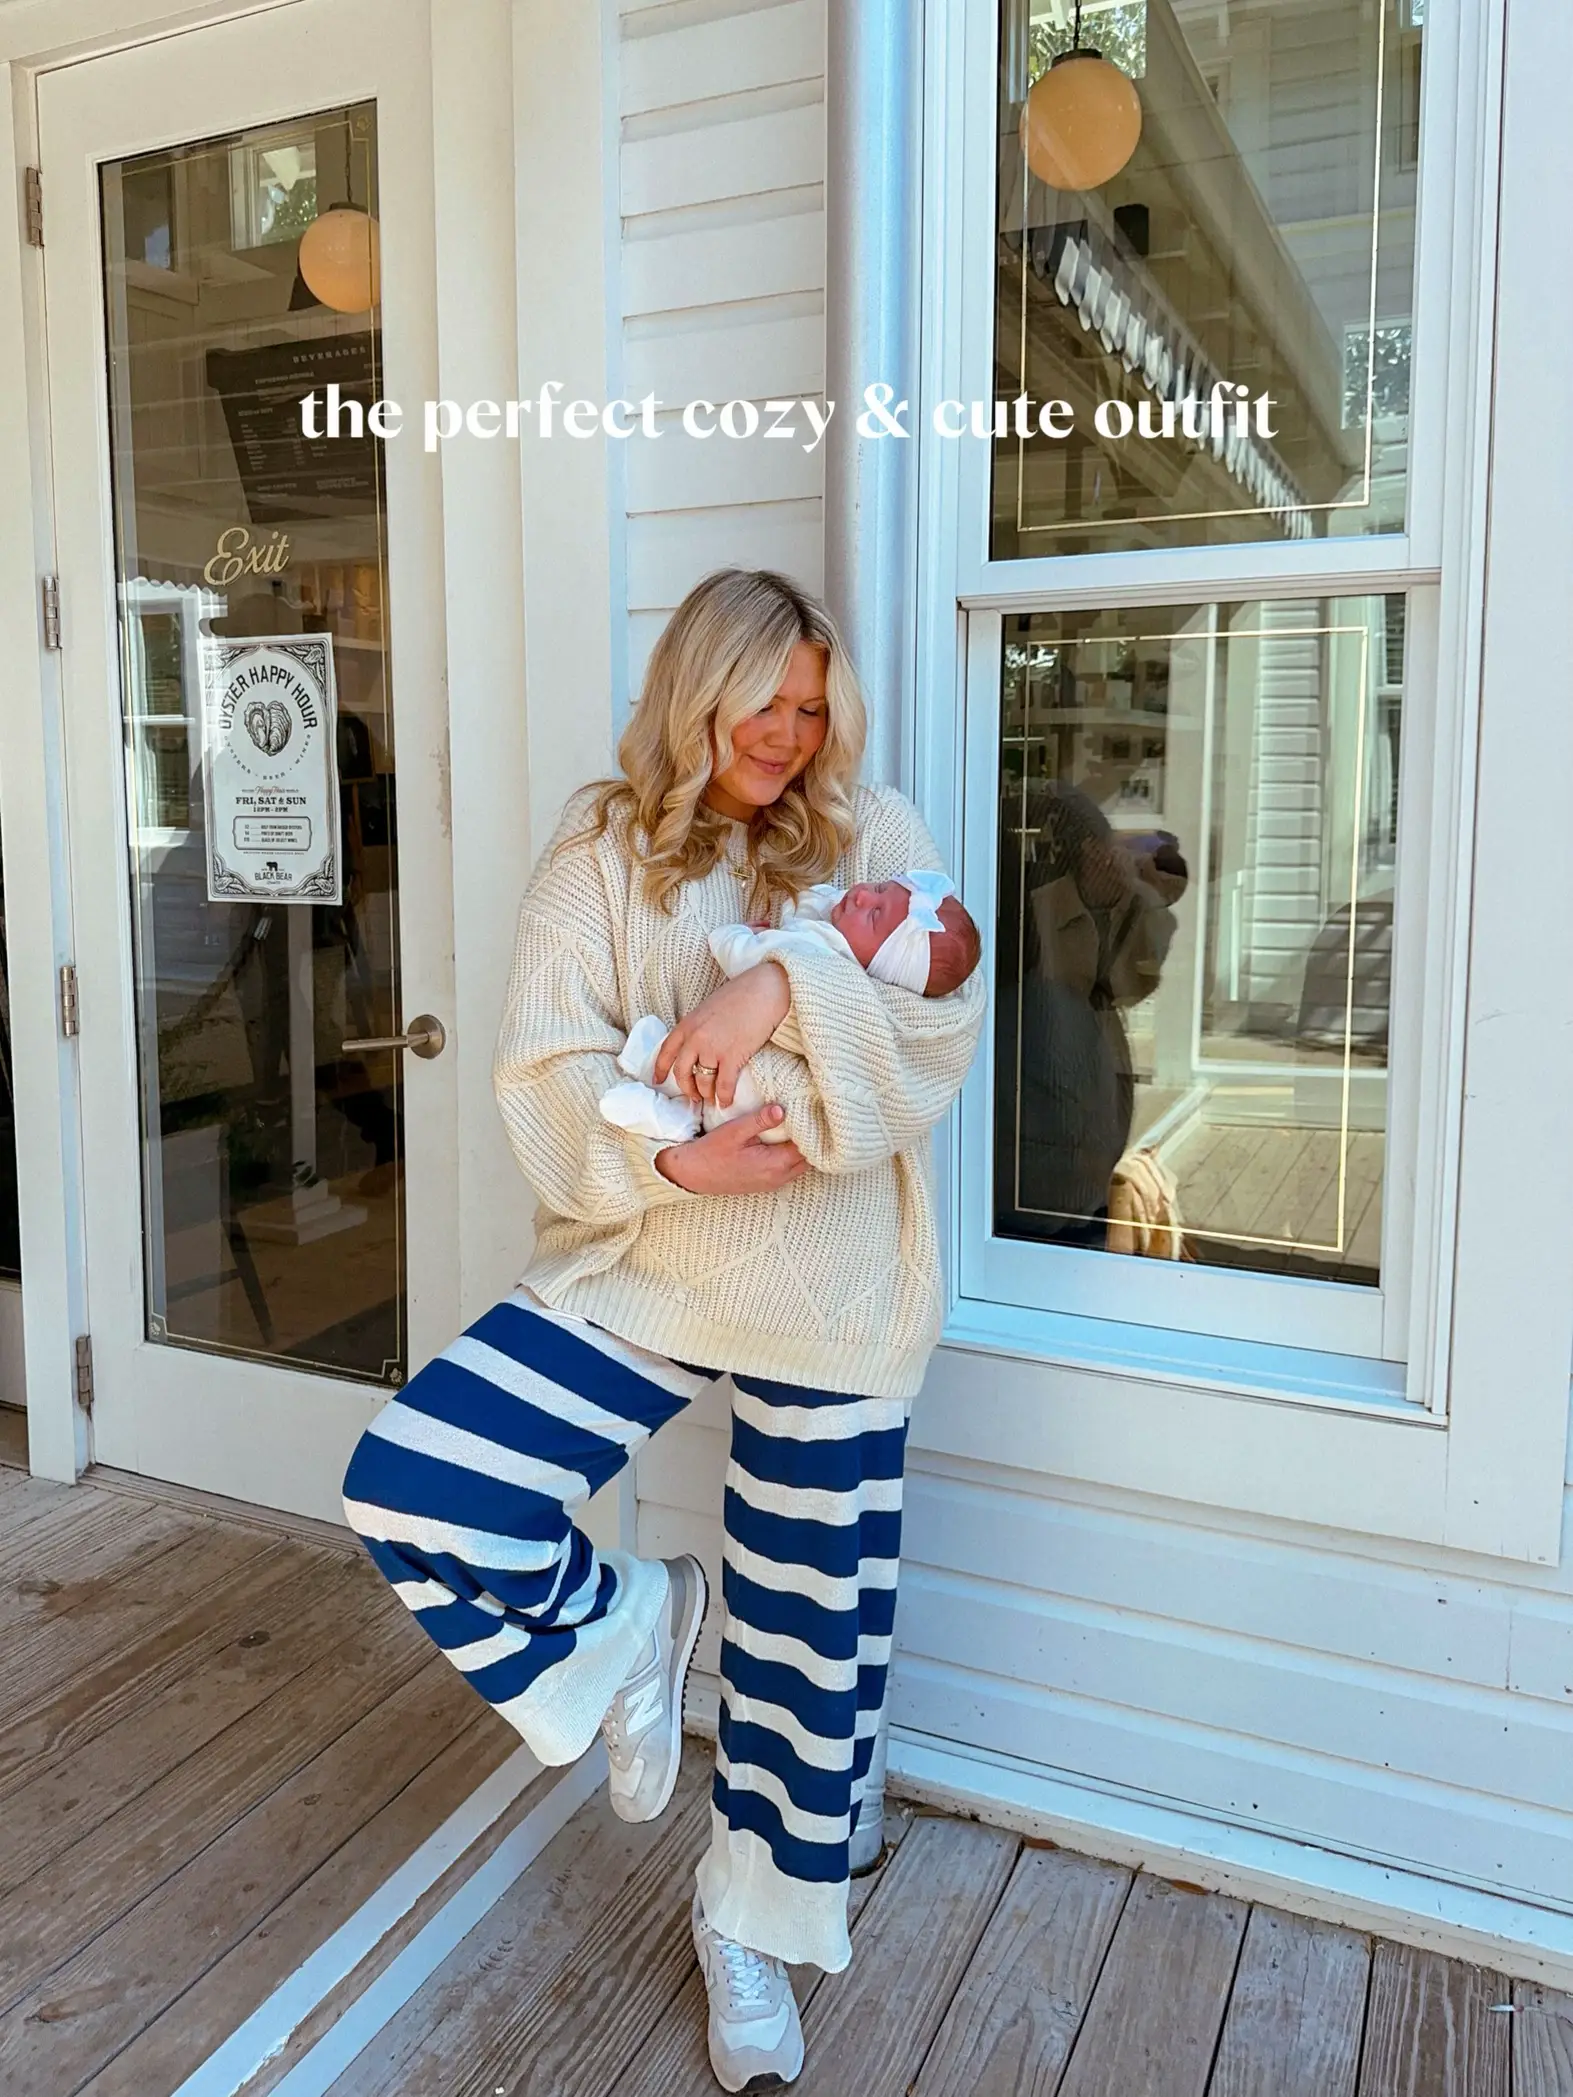 Stylish Postpartum outfit for hospital (that aren't hospital gowns) - SoCal  Mommy Life